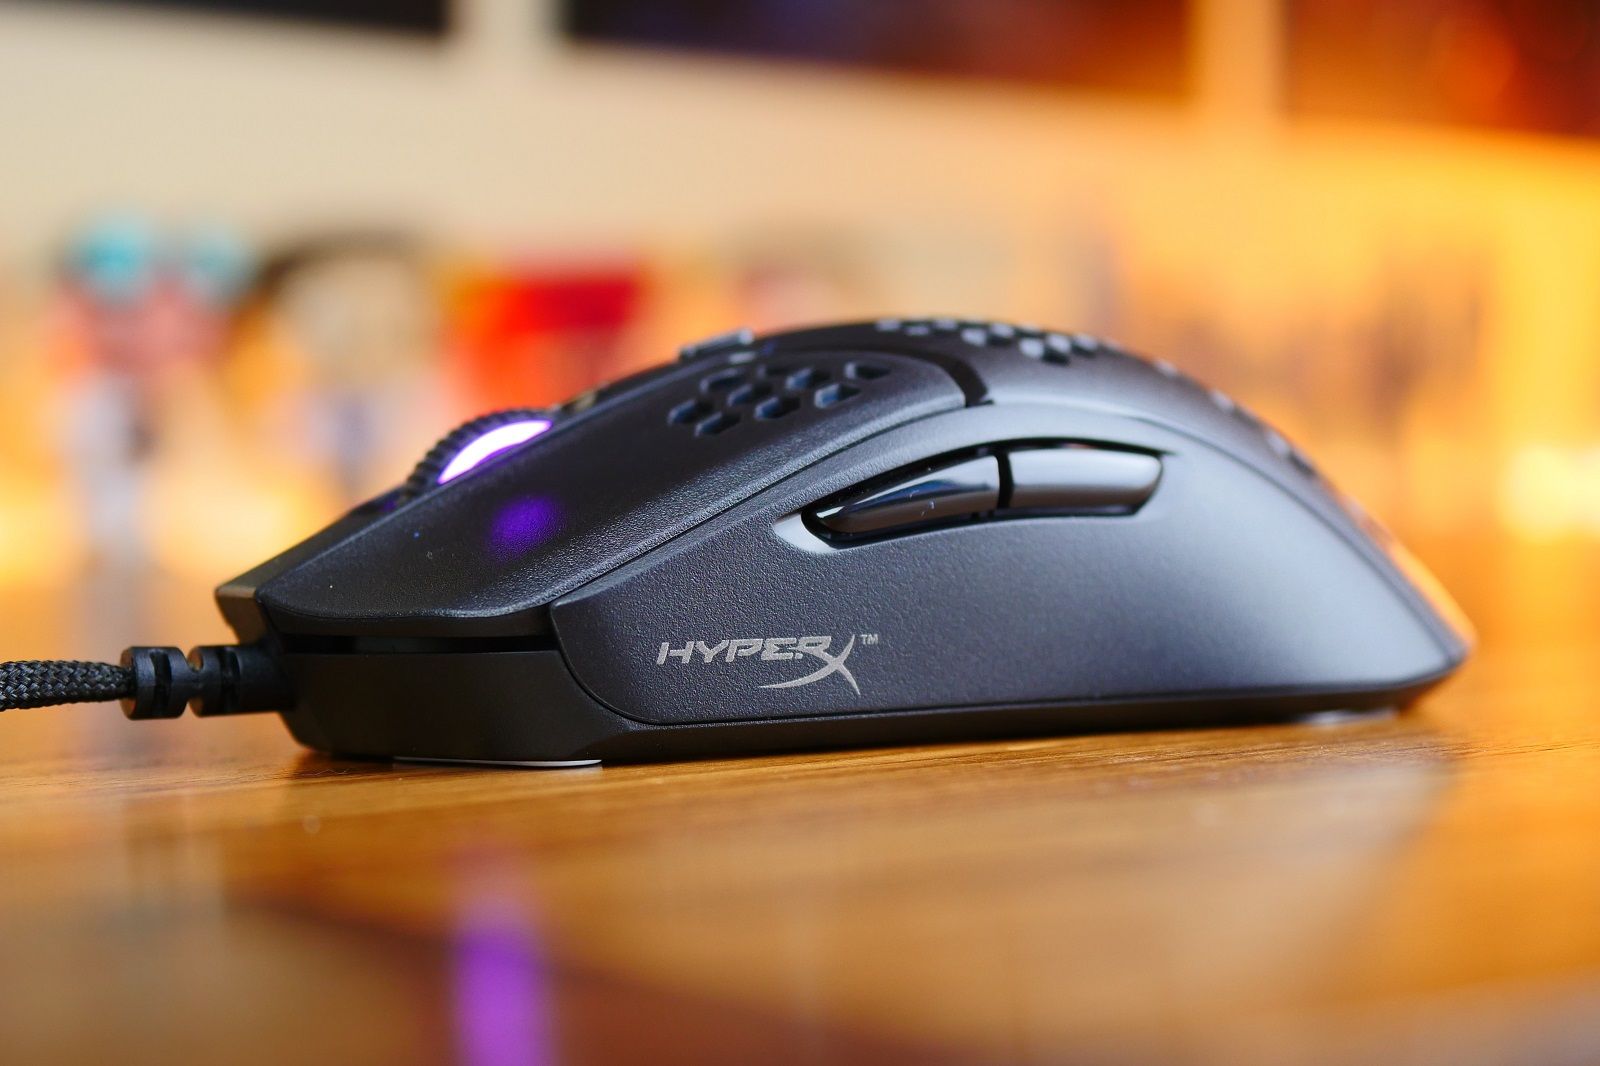 HyperX Pulsefire Haste gaming mouse review: Lightweight but not lacking photo 8